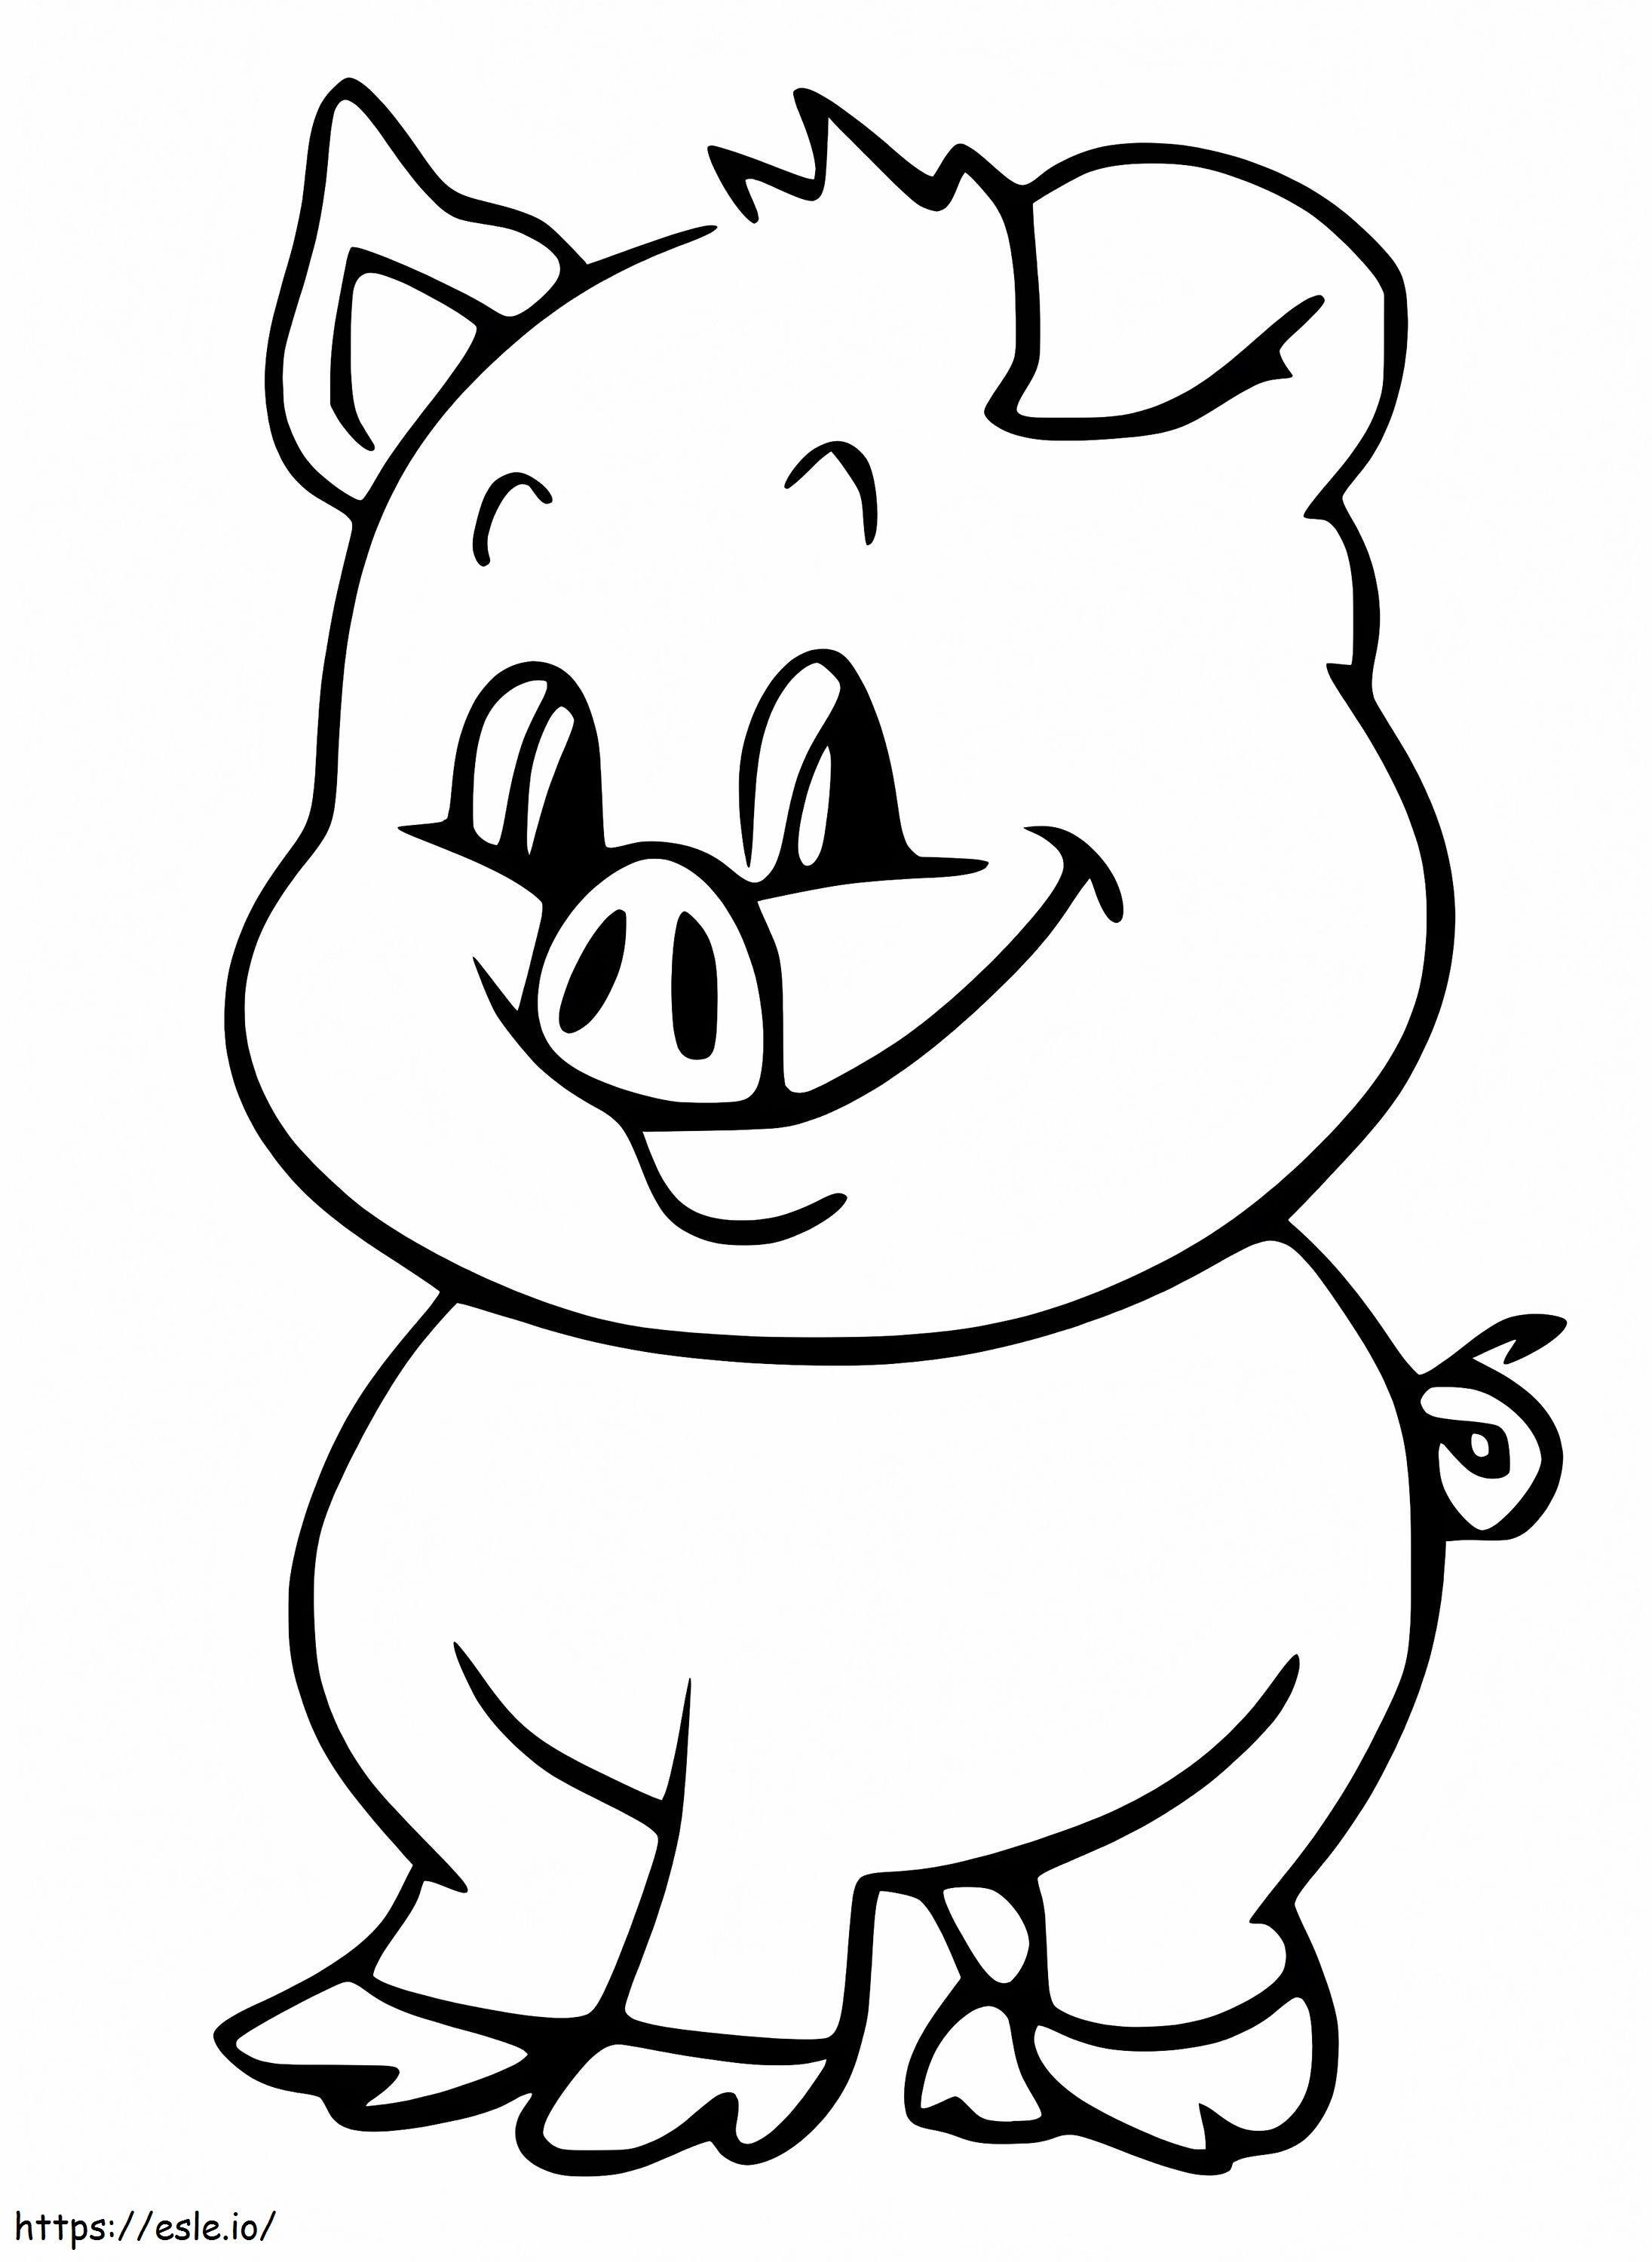 Free Printable Baby Pig coloring page